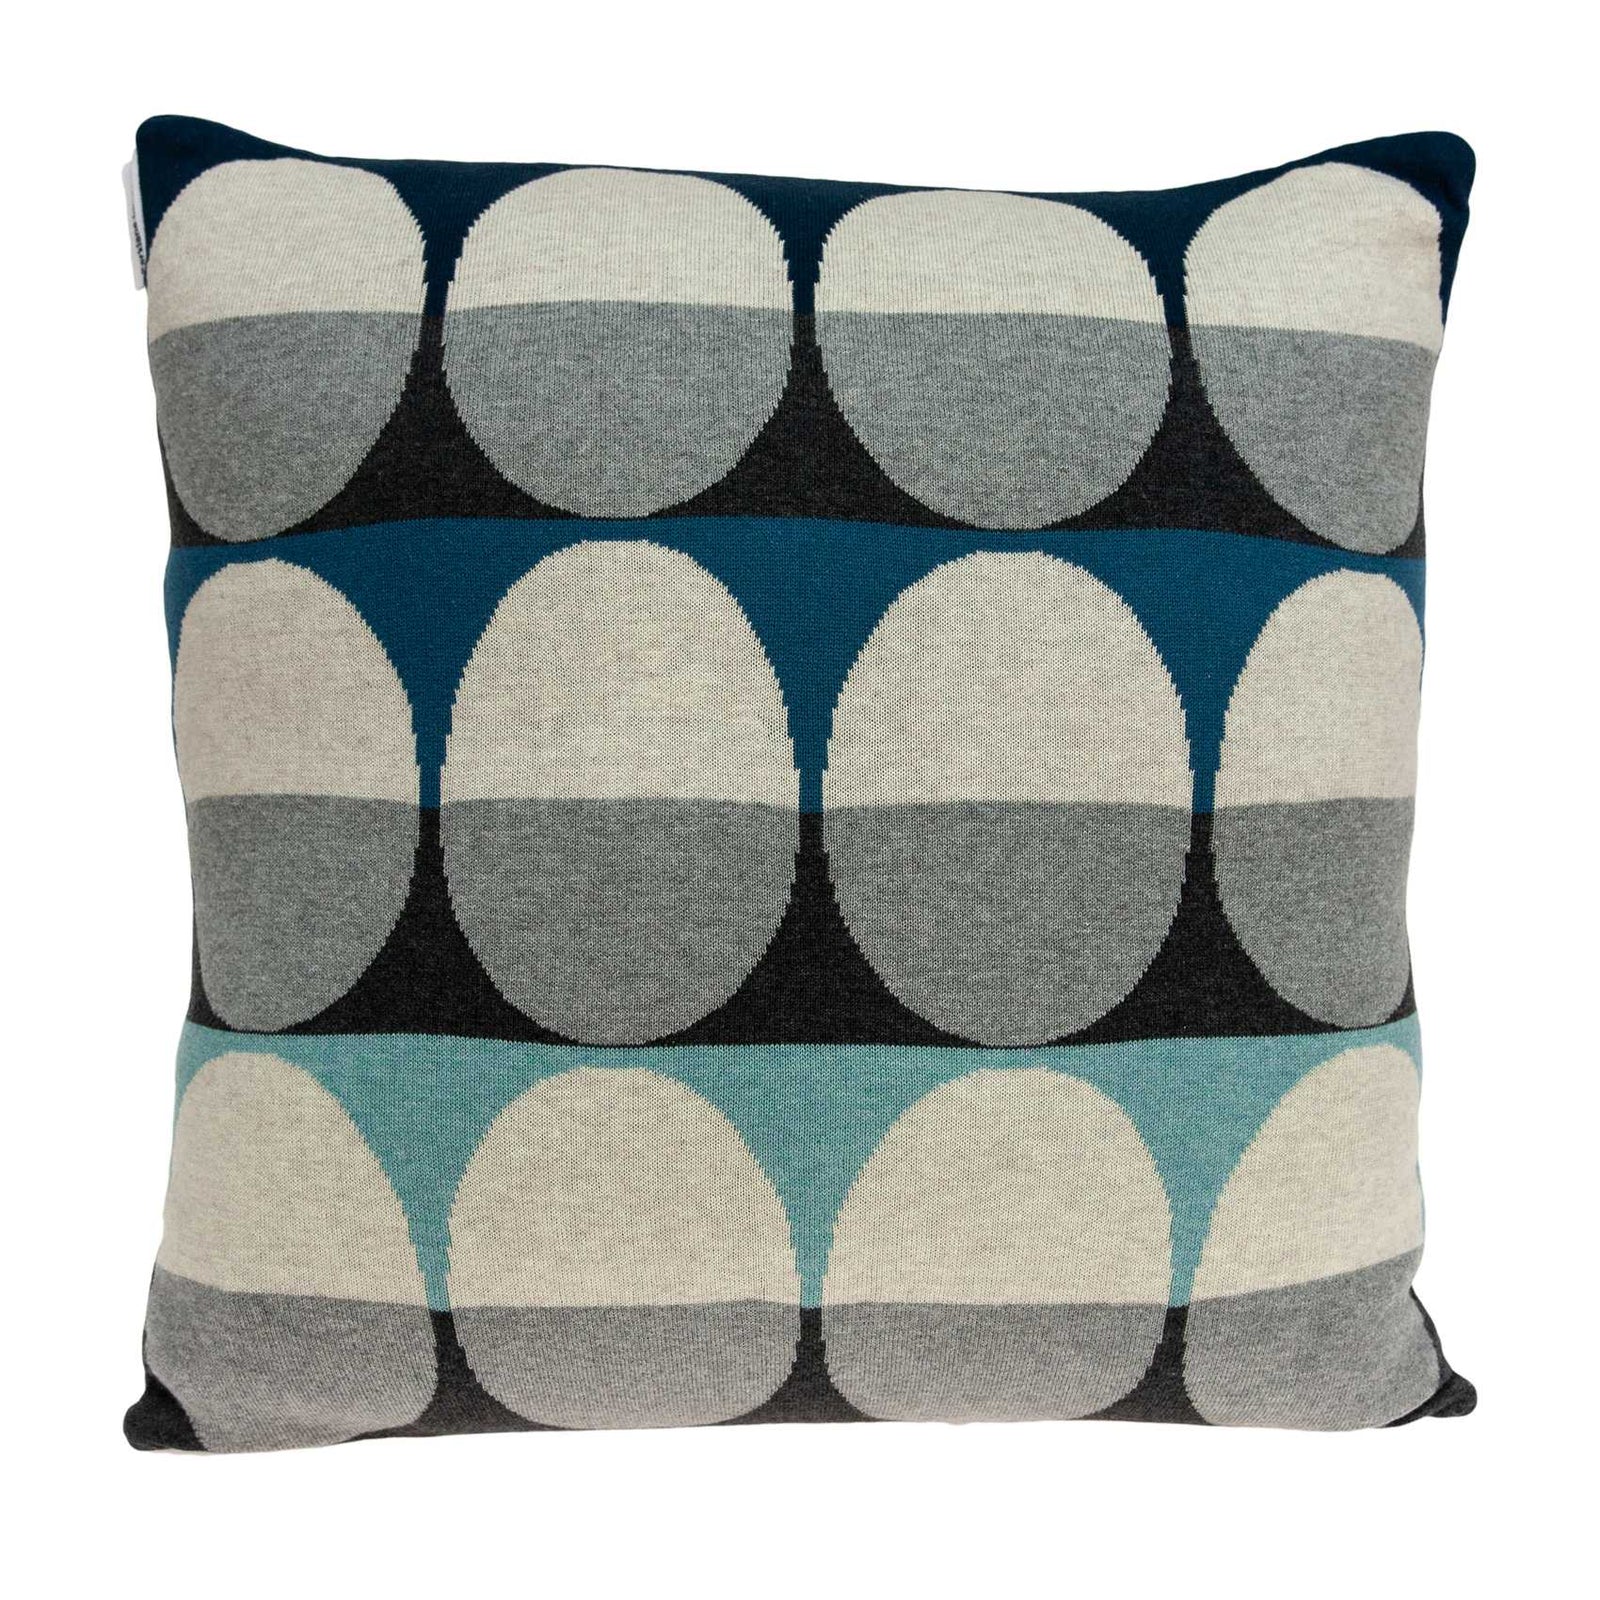 20" X 7" X 20" Transitional Gray And Blue Pillow Cover With Poly Insert